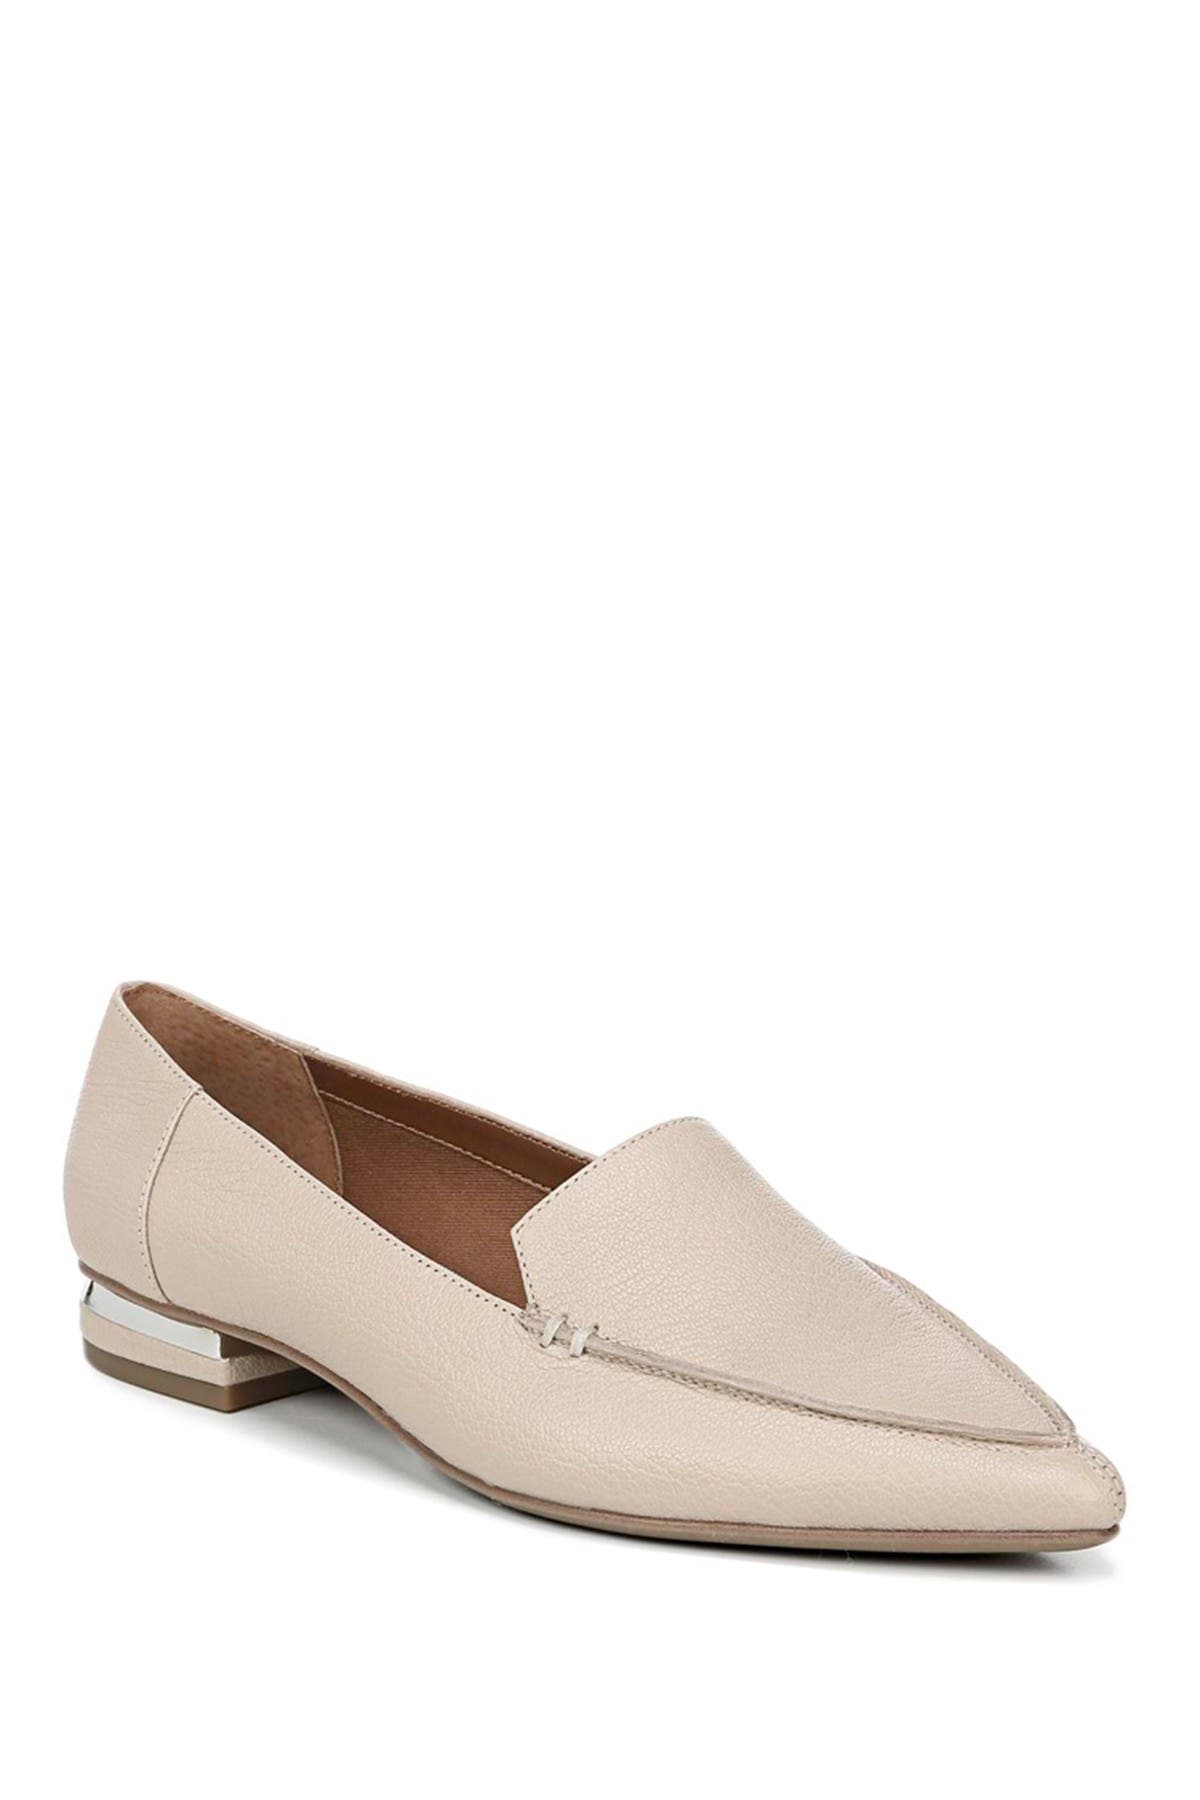 Franco Sarto | Starland Leather Loafer 